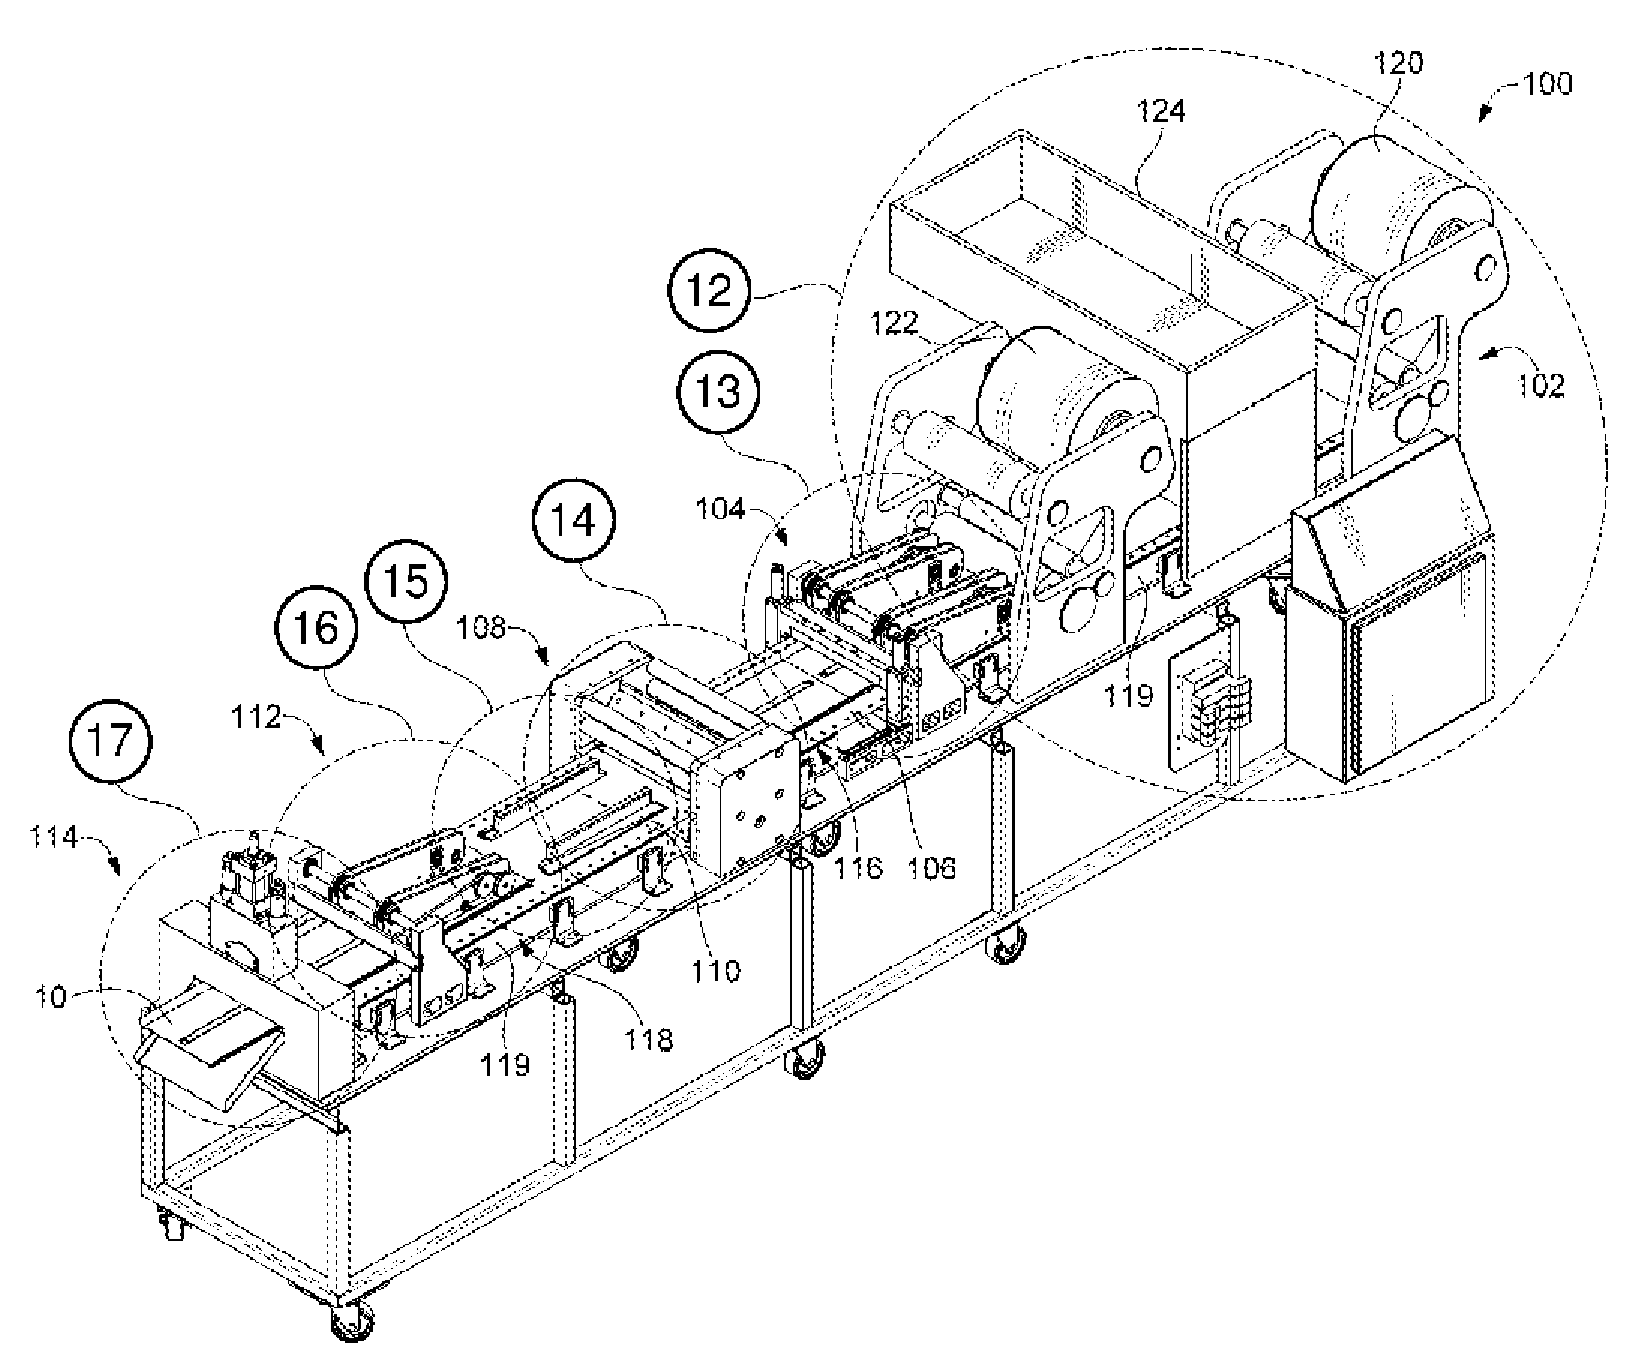 Supply packs and methods and systems for manufacturing supply packs